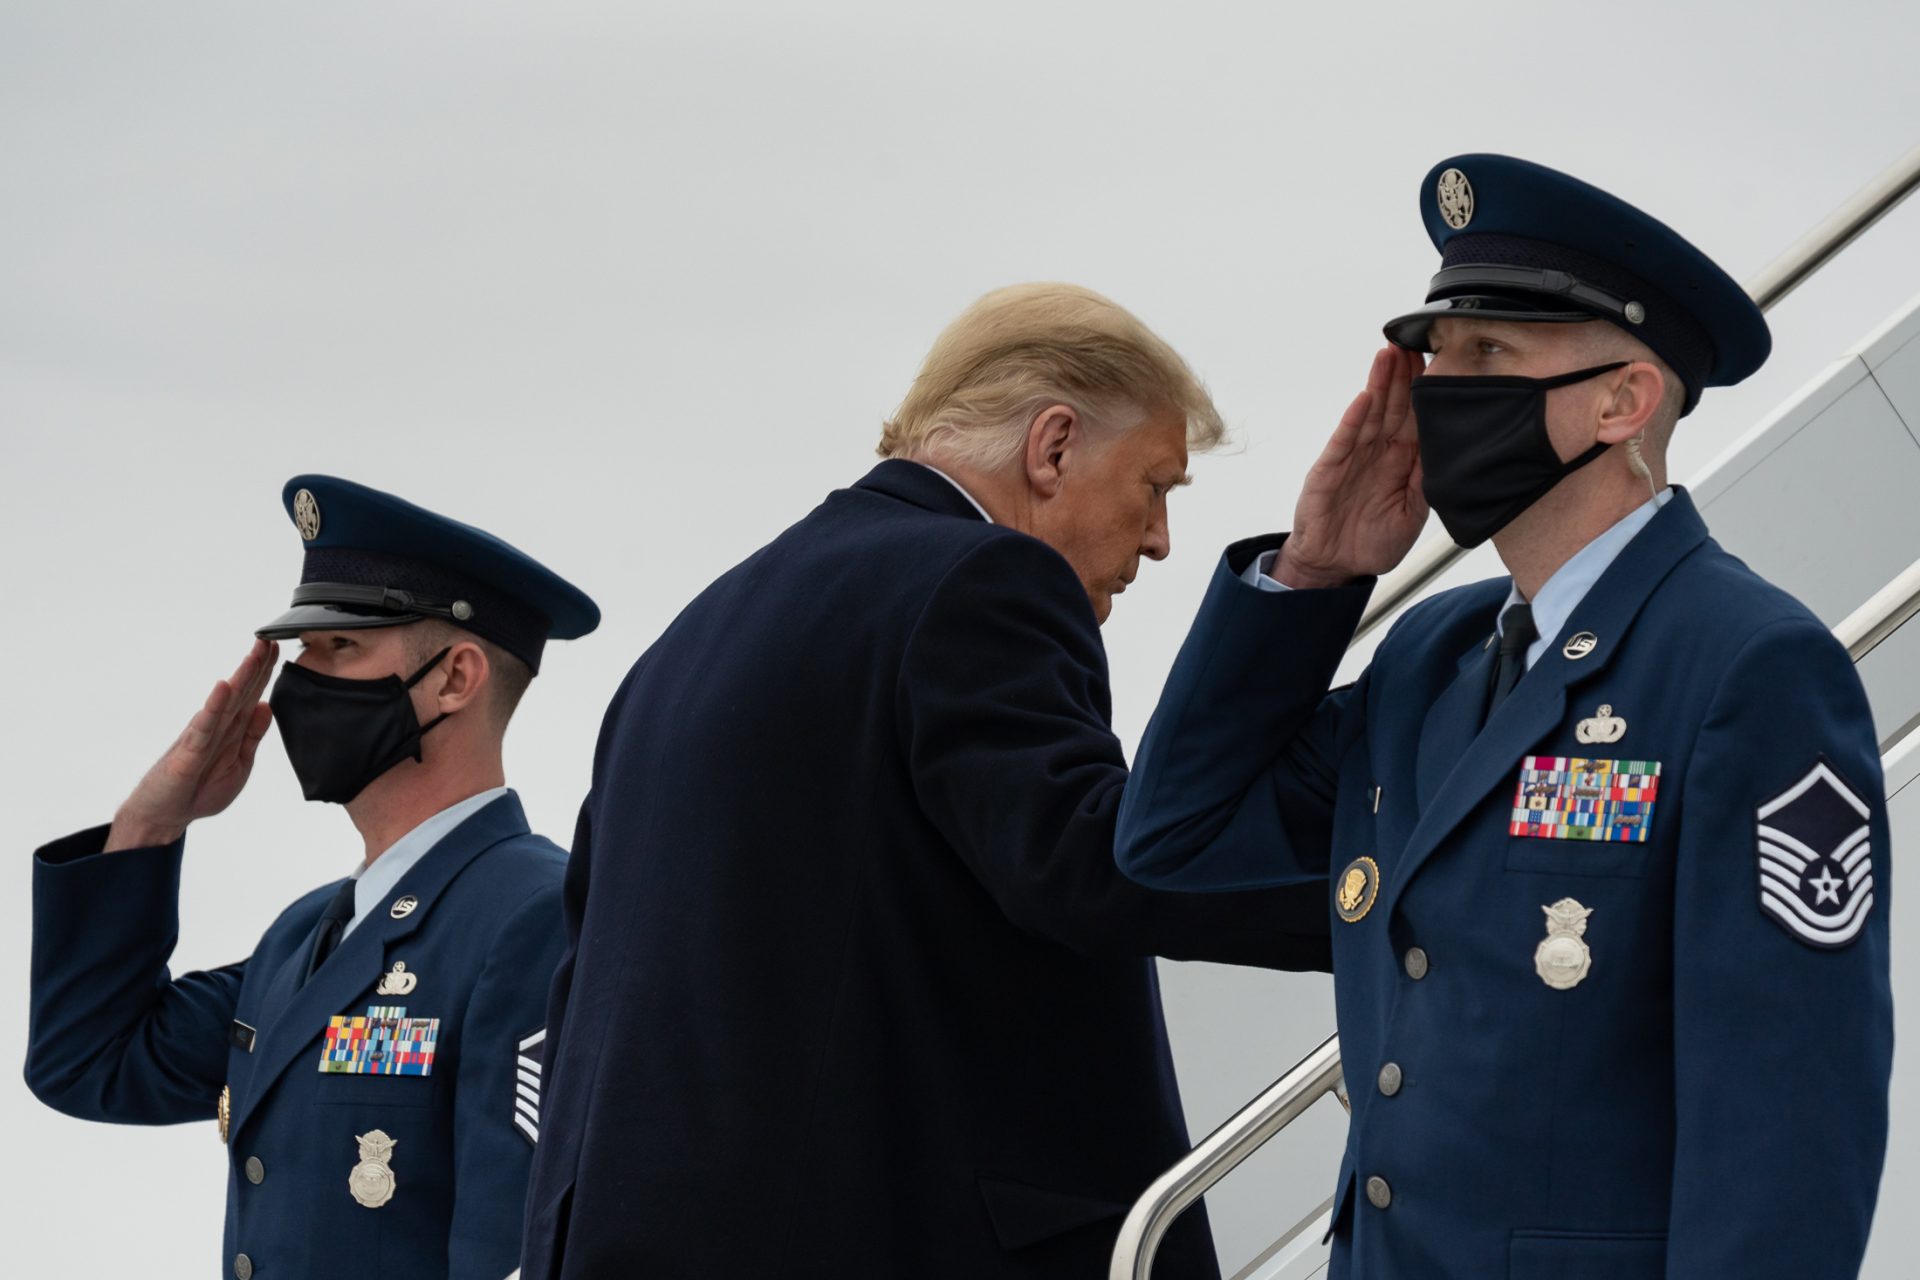 Trump enters Air Force One while flanked by masked Marines